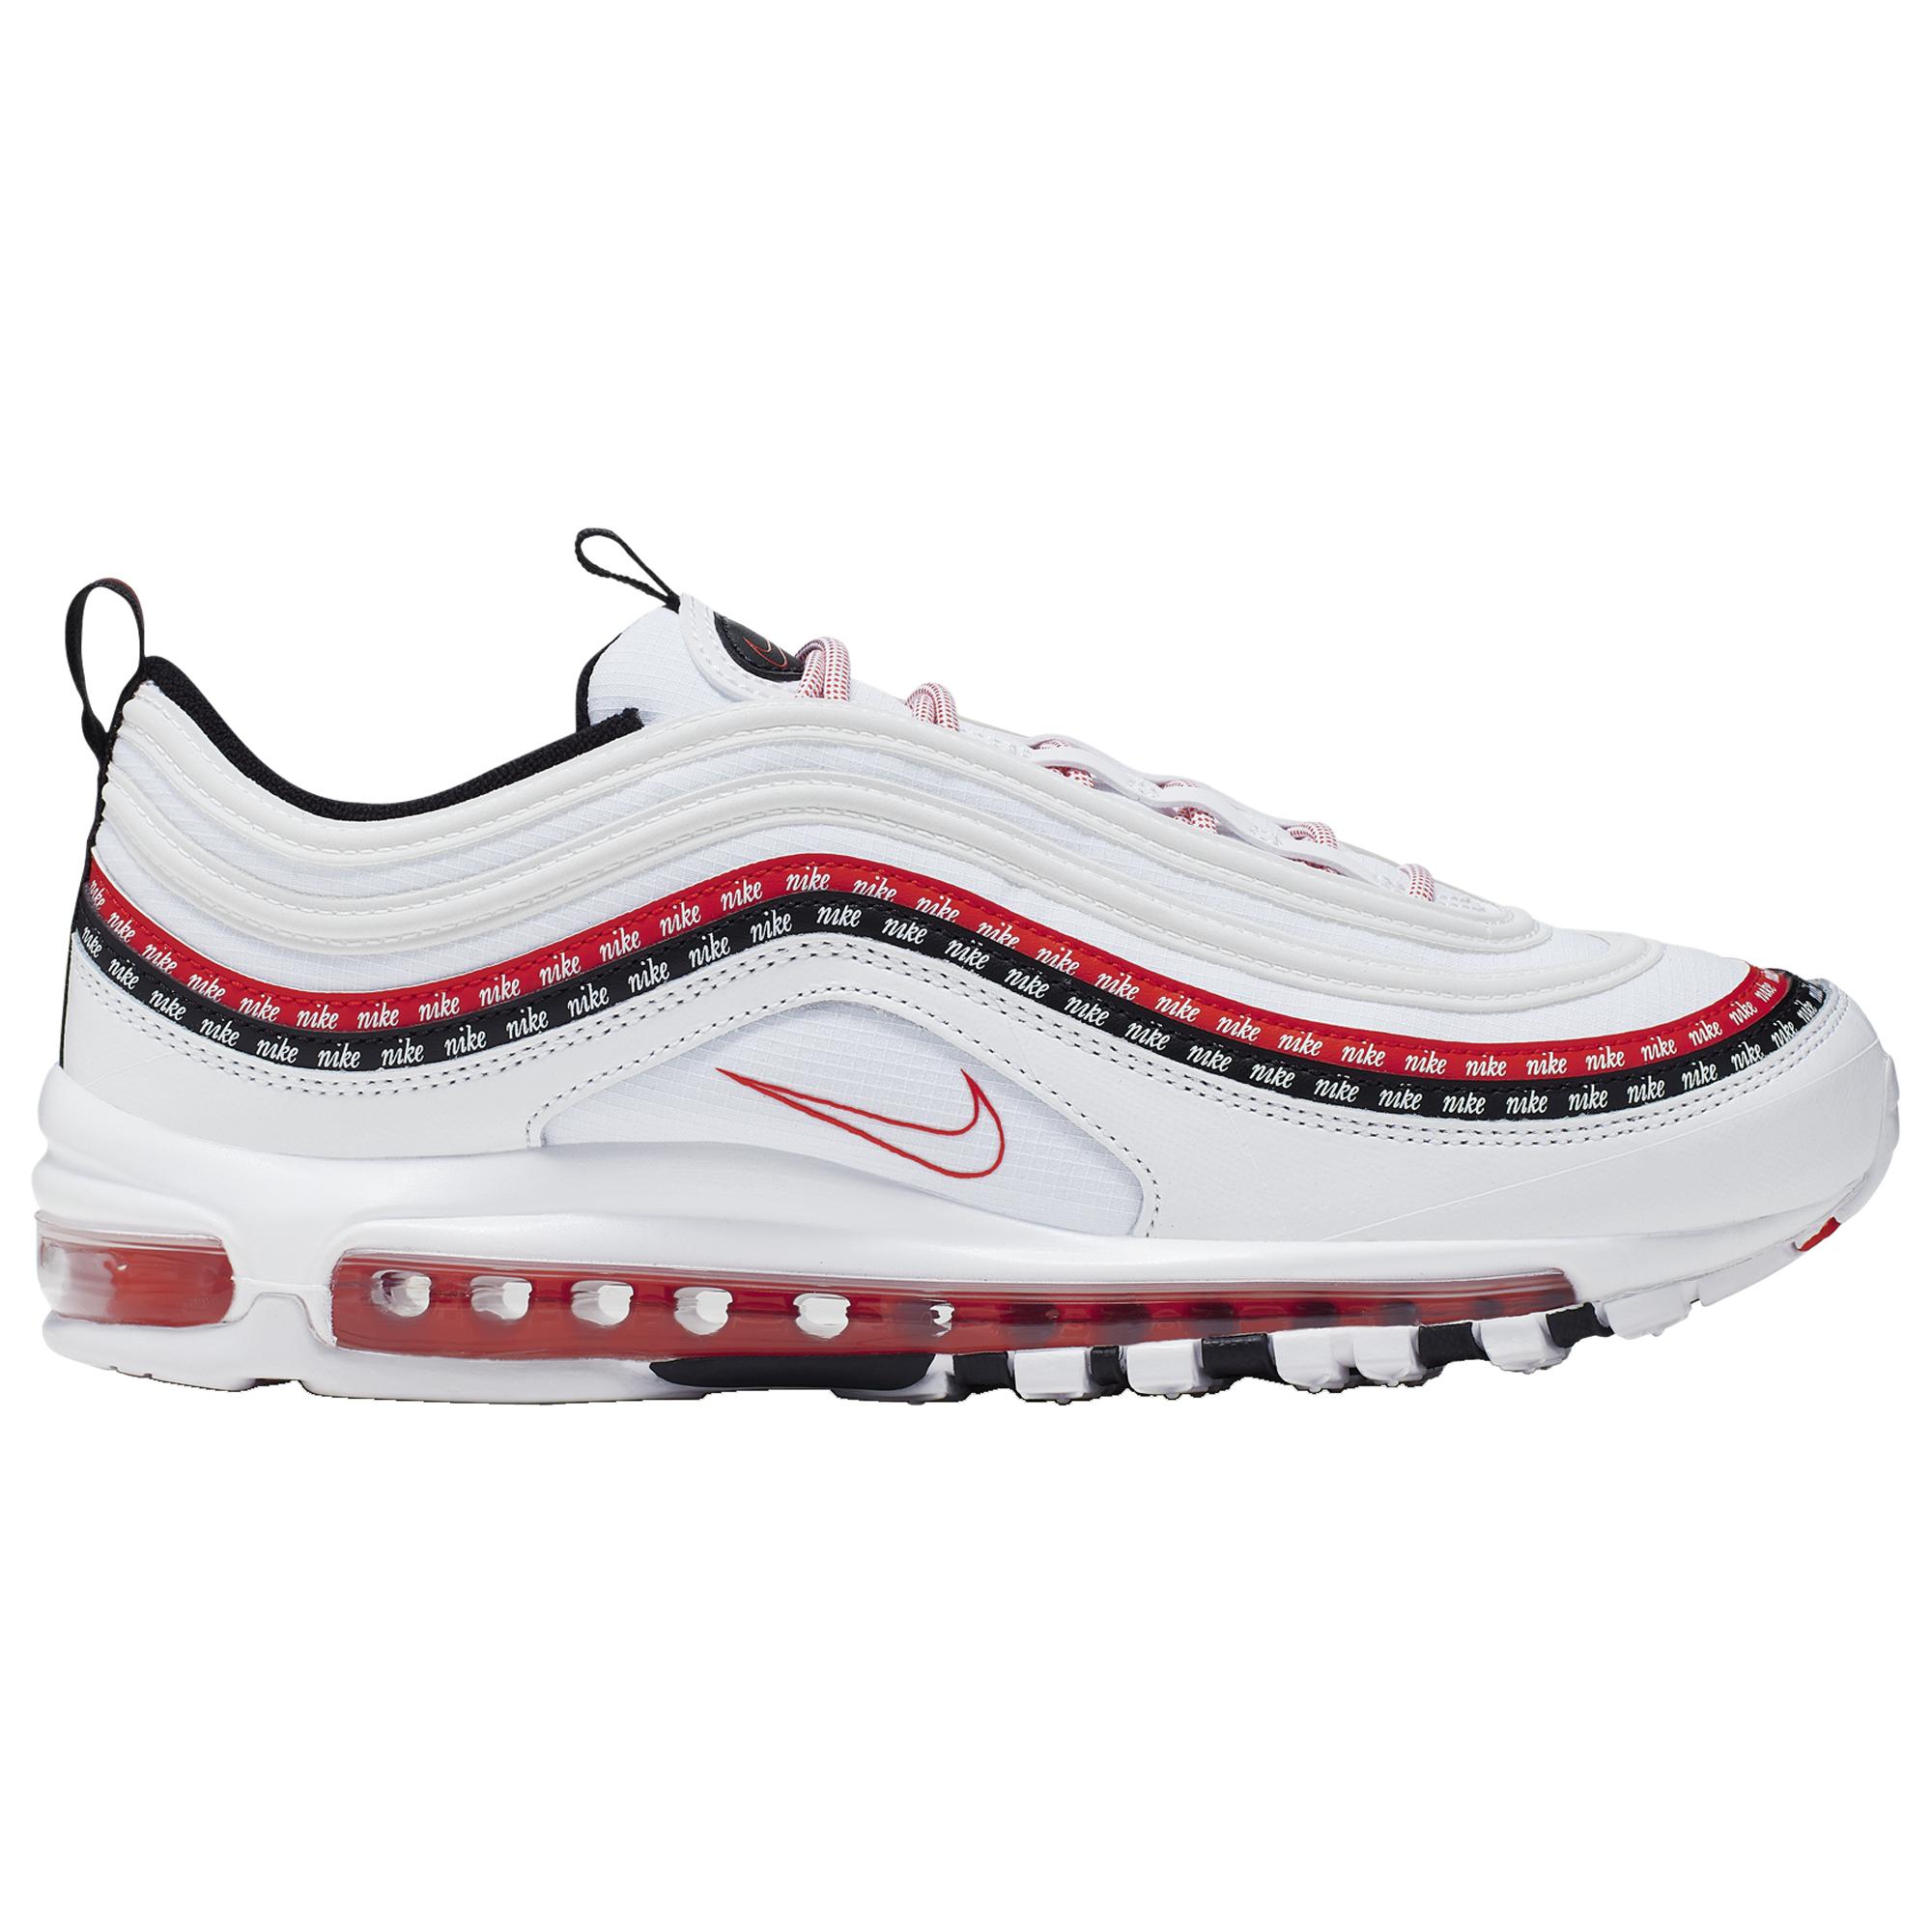 red white and black air max 97